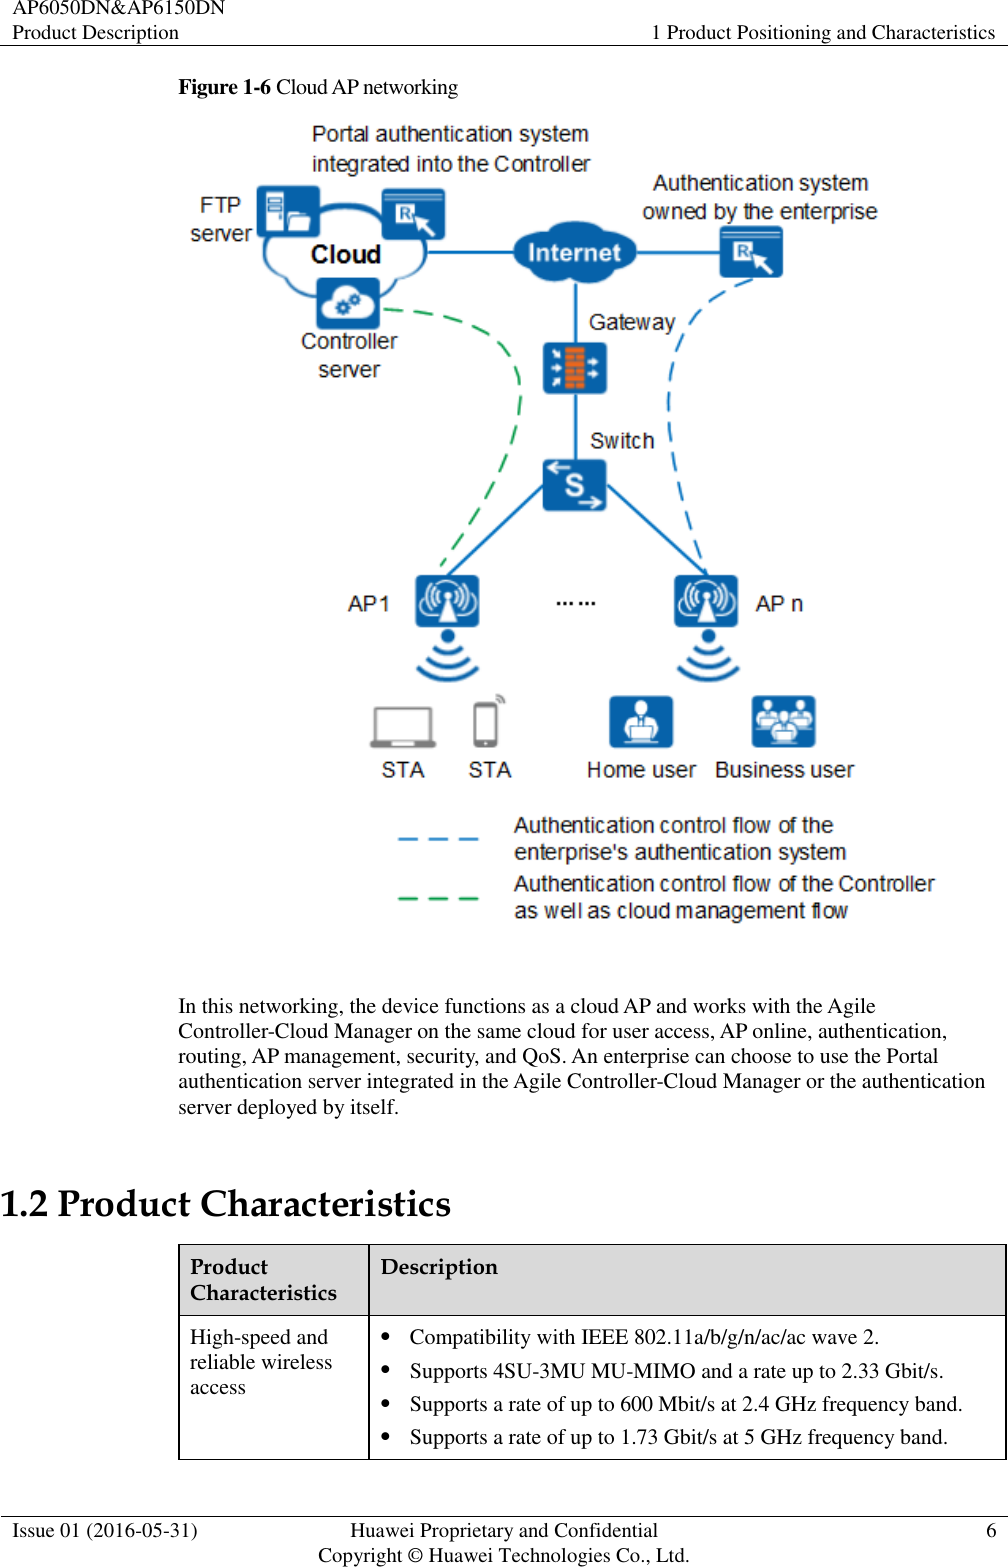 AP6050DN&amp;AP6150DN Product Description 1 Product Positioning and Characteristics  Issue 01 (2016-05-31) Huawei Proprietary and Confidential                                     Copyright © Huawei Technologies Co., Ltd. 6  Figure 1-6 Cloud AP networking   In this networking, the device functions as a cloud AP and works with the Agile Controller-Cloud Manager on the same cloud for user access, AP online, authentication, routing, AP management, security, and QoS. An enterprise can choose to use the Portal authentication server integrated in the Agile Controller-Cloud Manager or the authentication server deployed by itself. 1.2 Product Characteristics Product Characteristics Description High-speed and reliable wireless access  Compatibility with IEEE 802.11a/b/g/n/ac/ac wave 2.  Supports 4SU-3MU MU-MIMO and a rate up to 2.33 Gbit/s.  Supports a rate of up to 600 Mbit/s at 2.4 GHz frequency band.  Supports a rate of up to 1.73 Gbit/s at 5 GHz frequency band. 